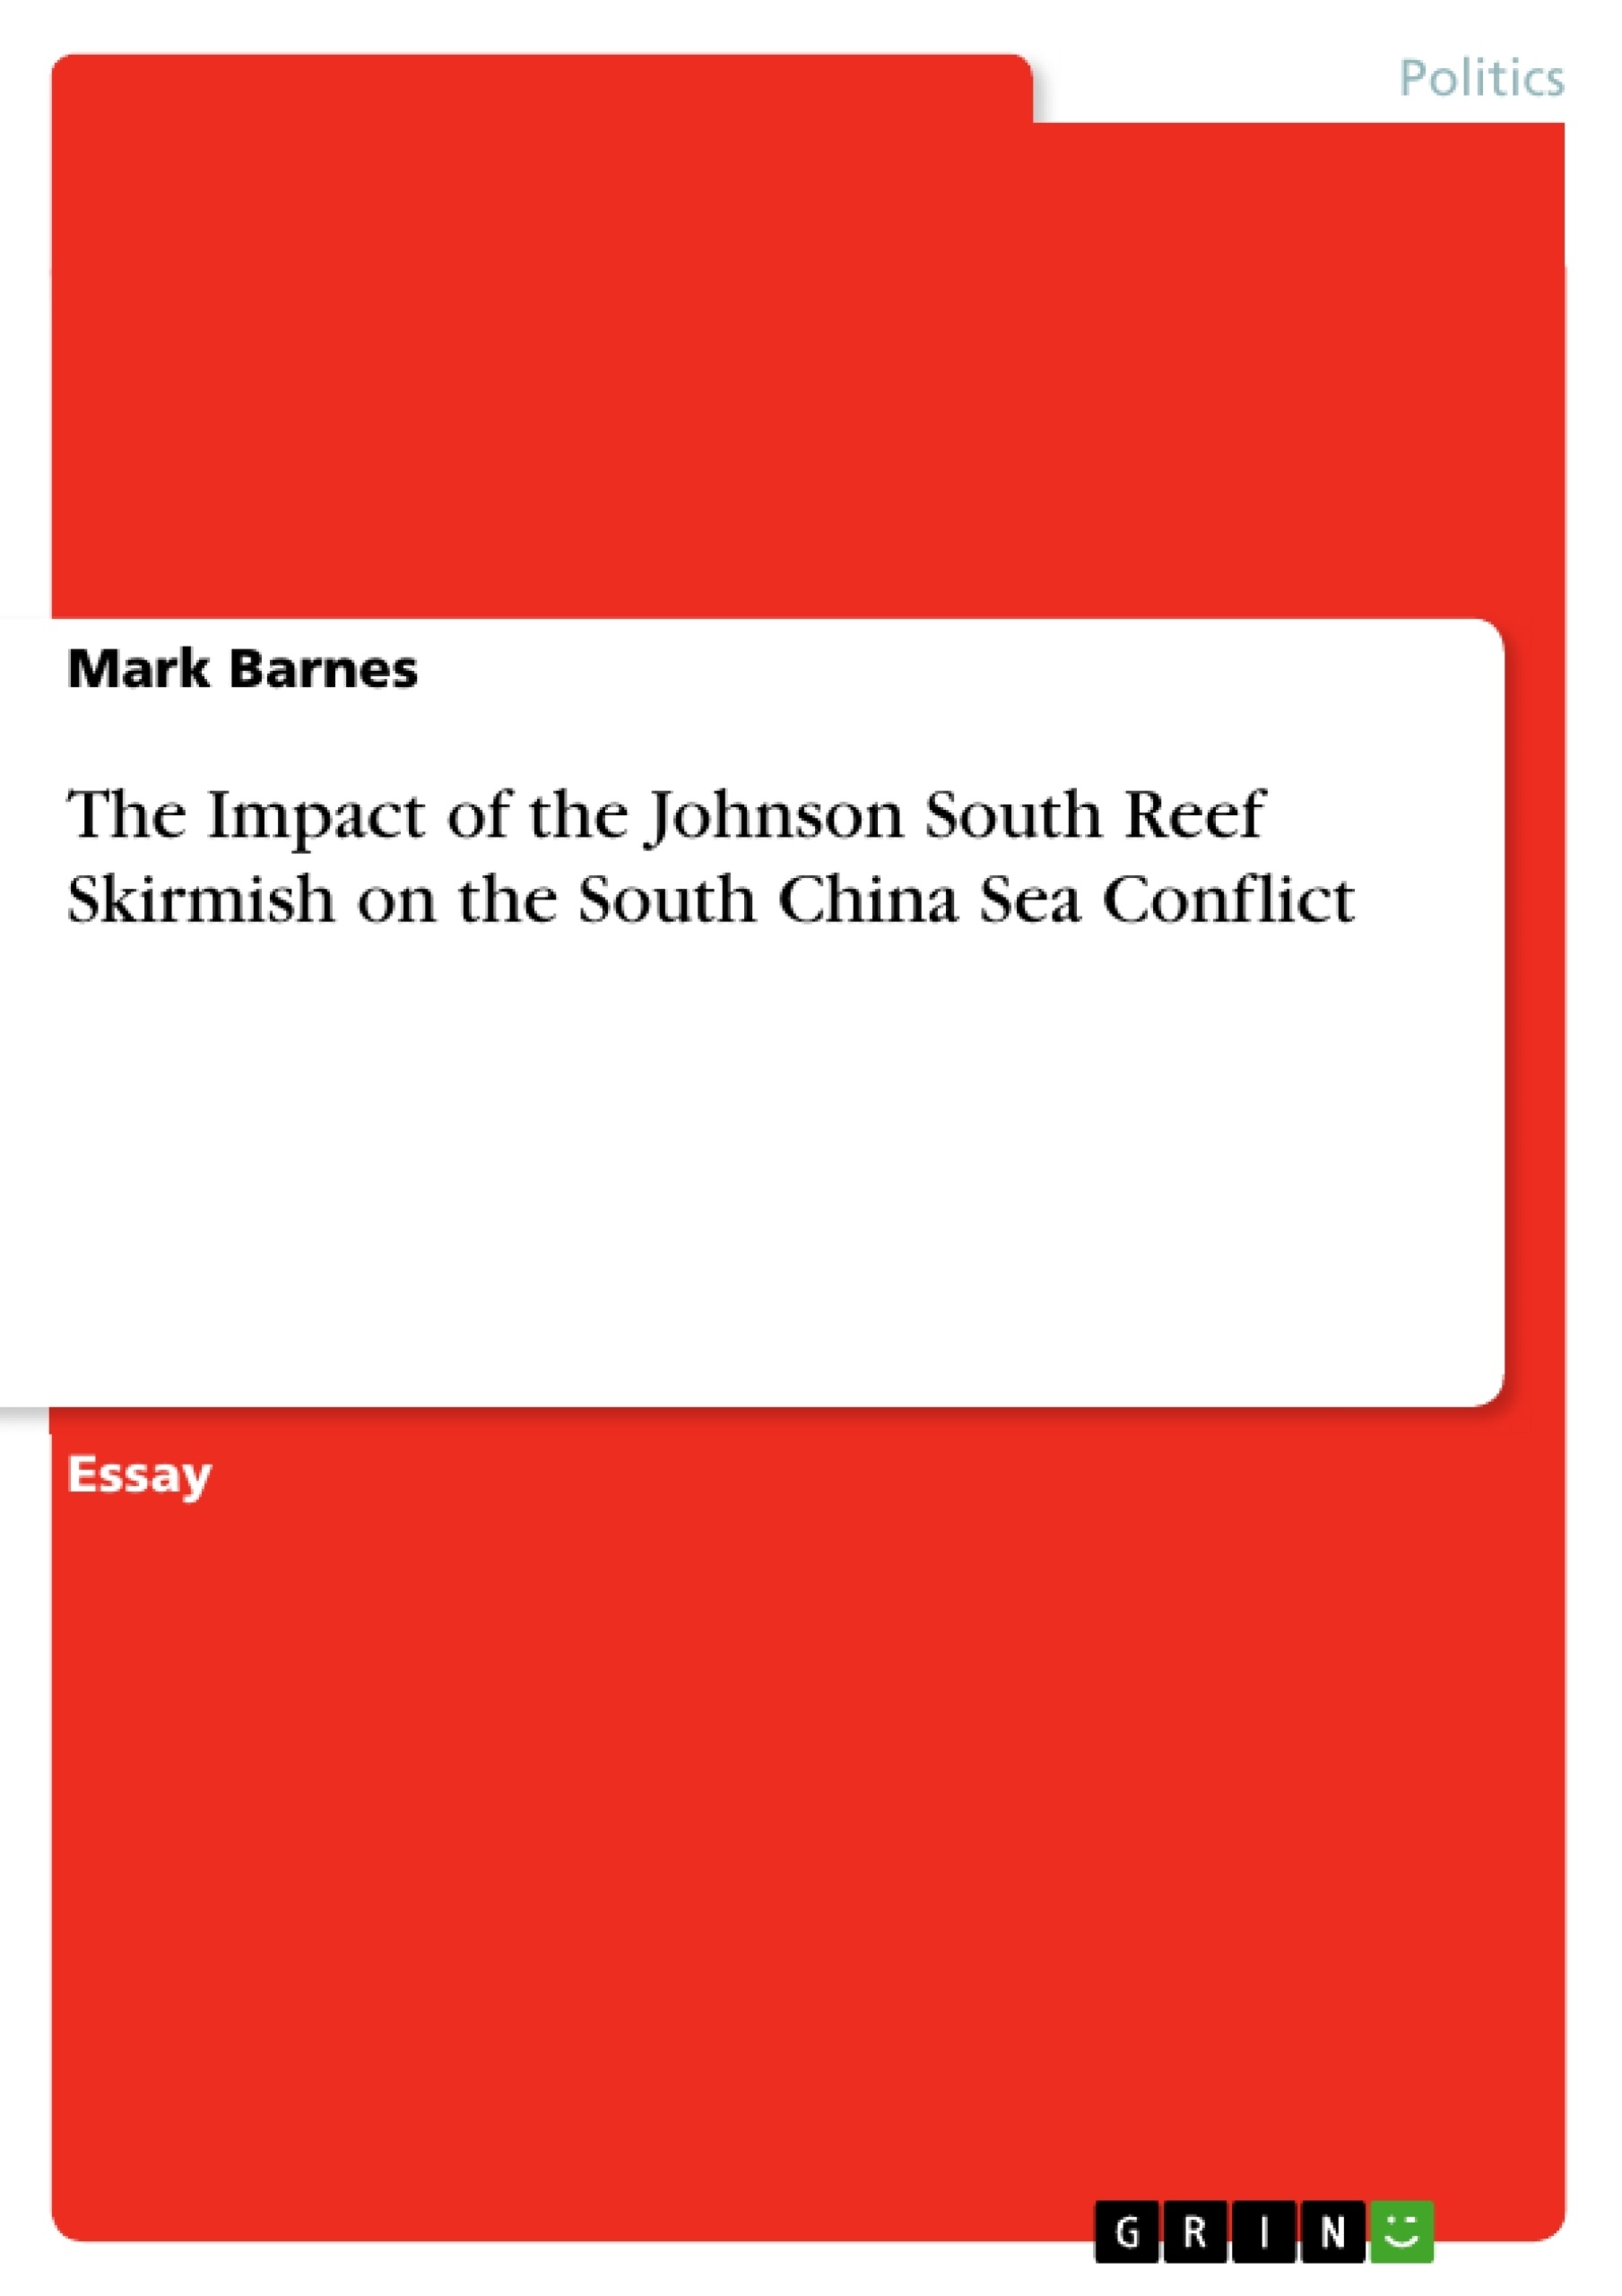 Título: The Impact of the Johnson South Reef Skirmish on the South China Sea Conflict